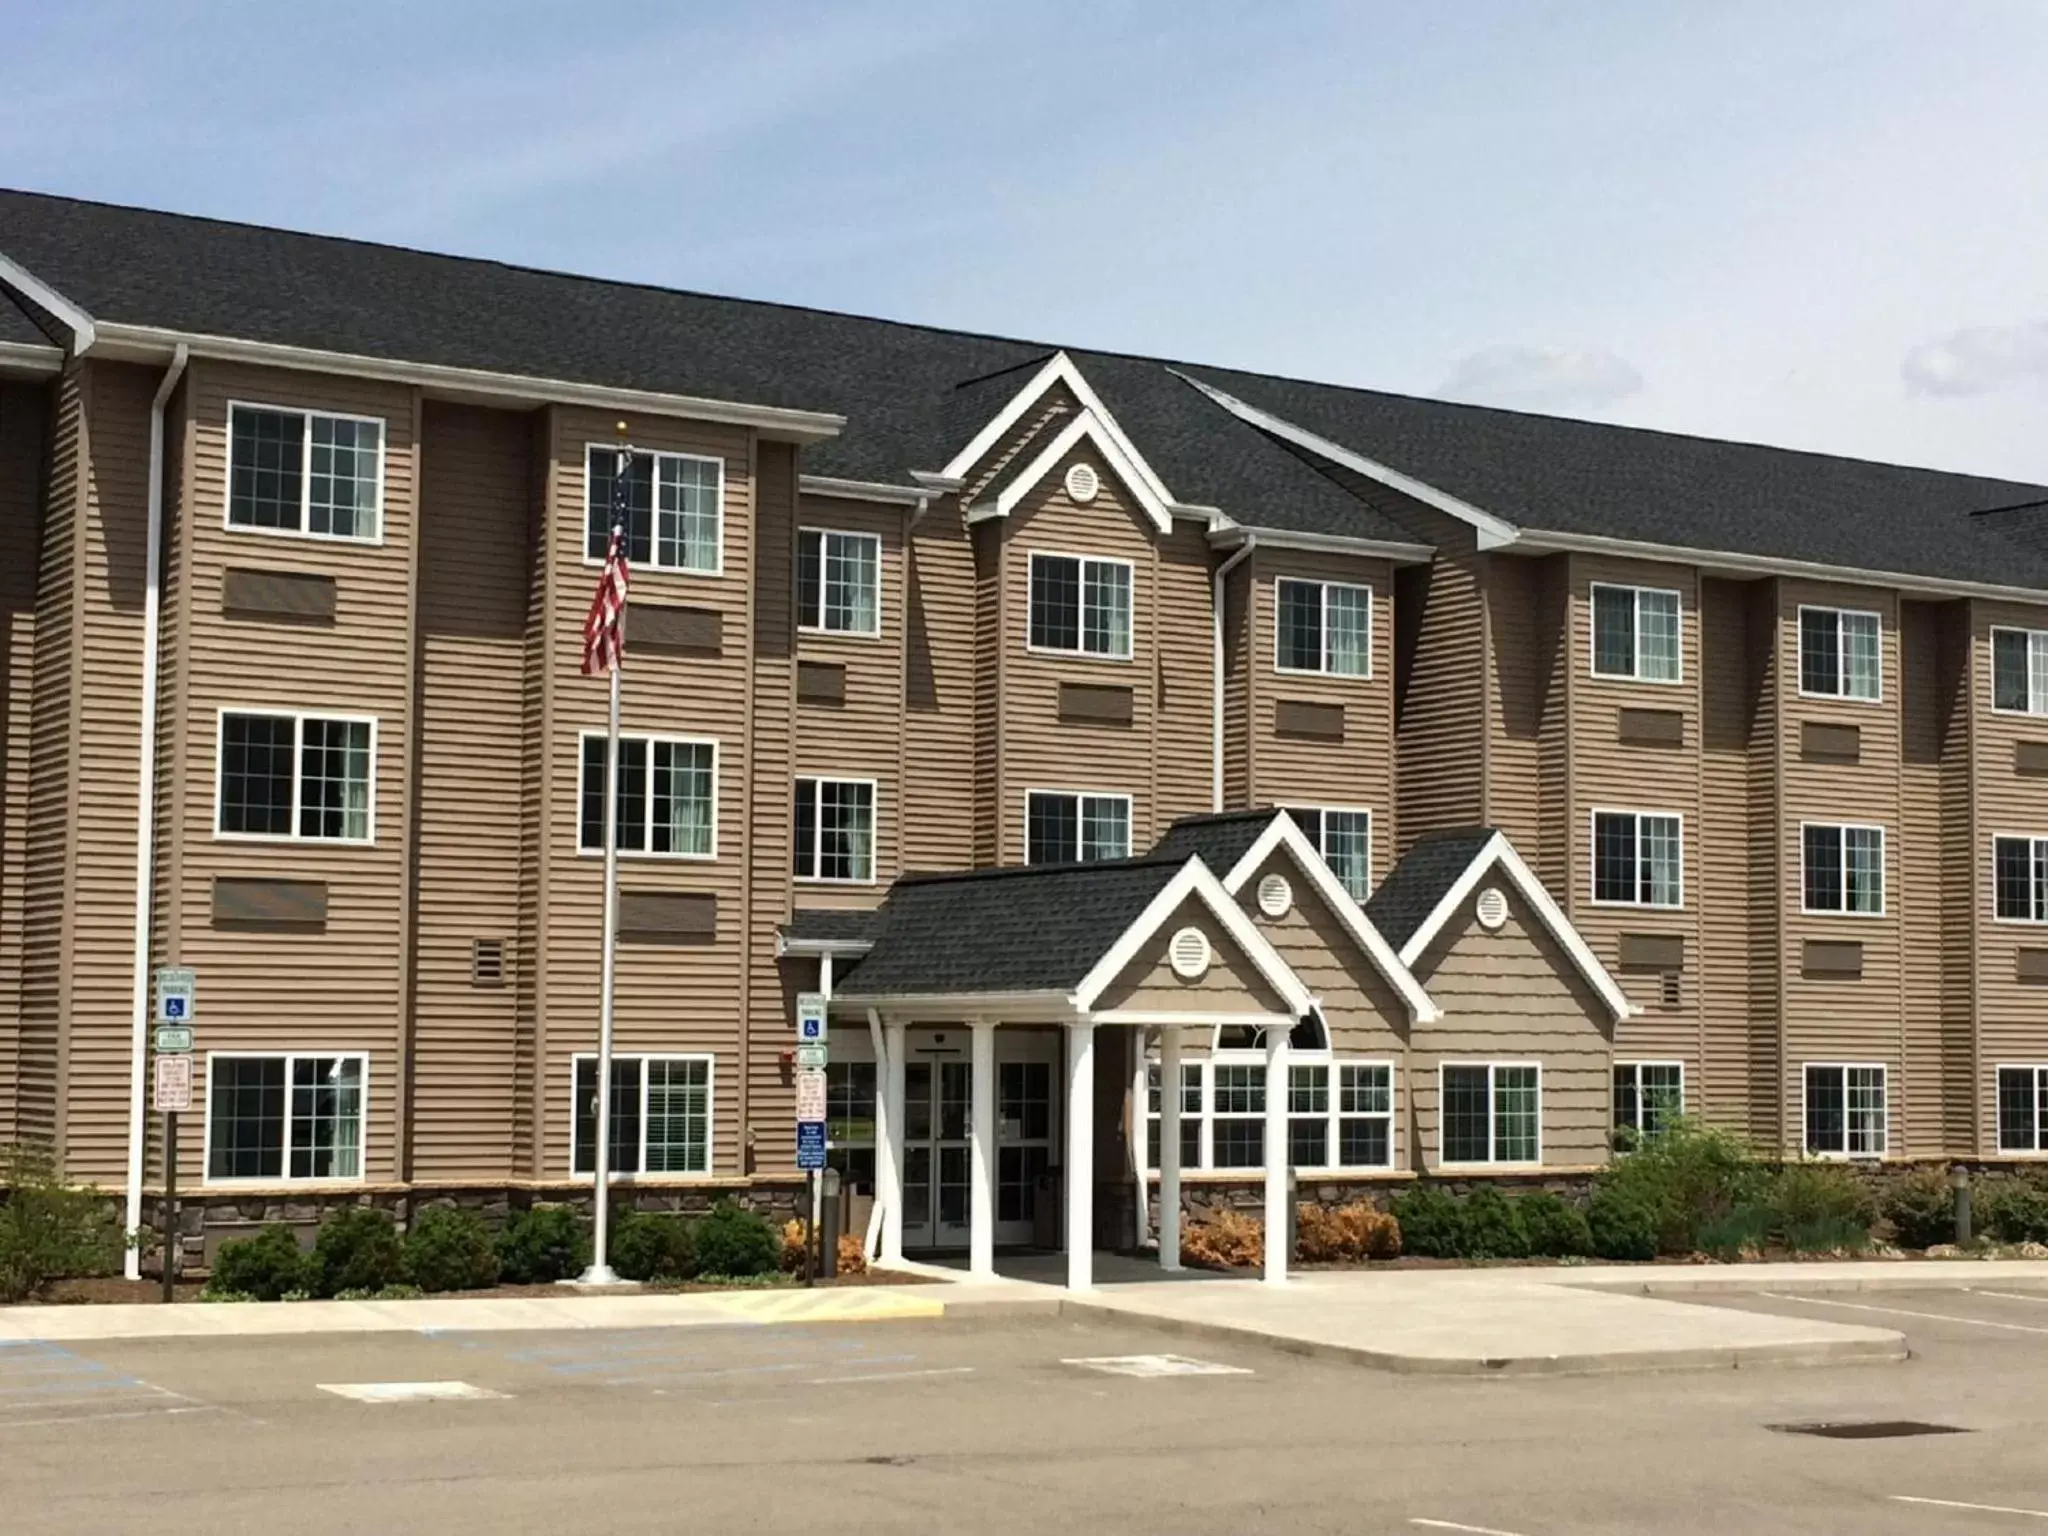 Facade/entrance, Property Building in Microtel Inn & Suites Mansfield PA